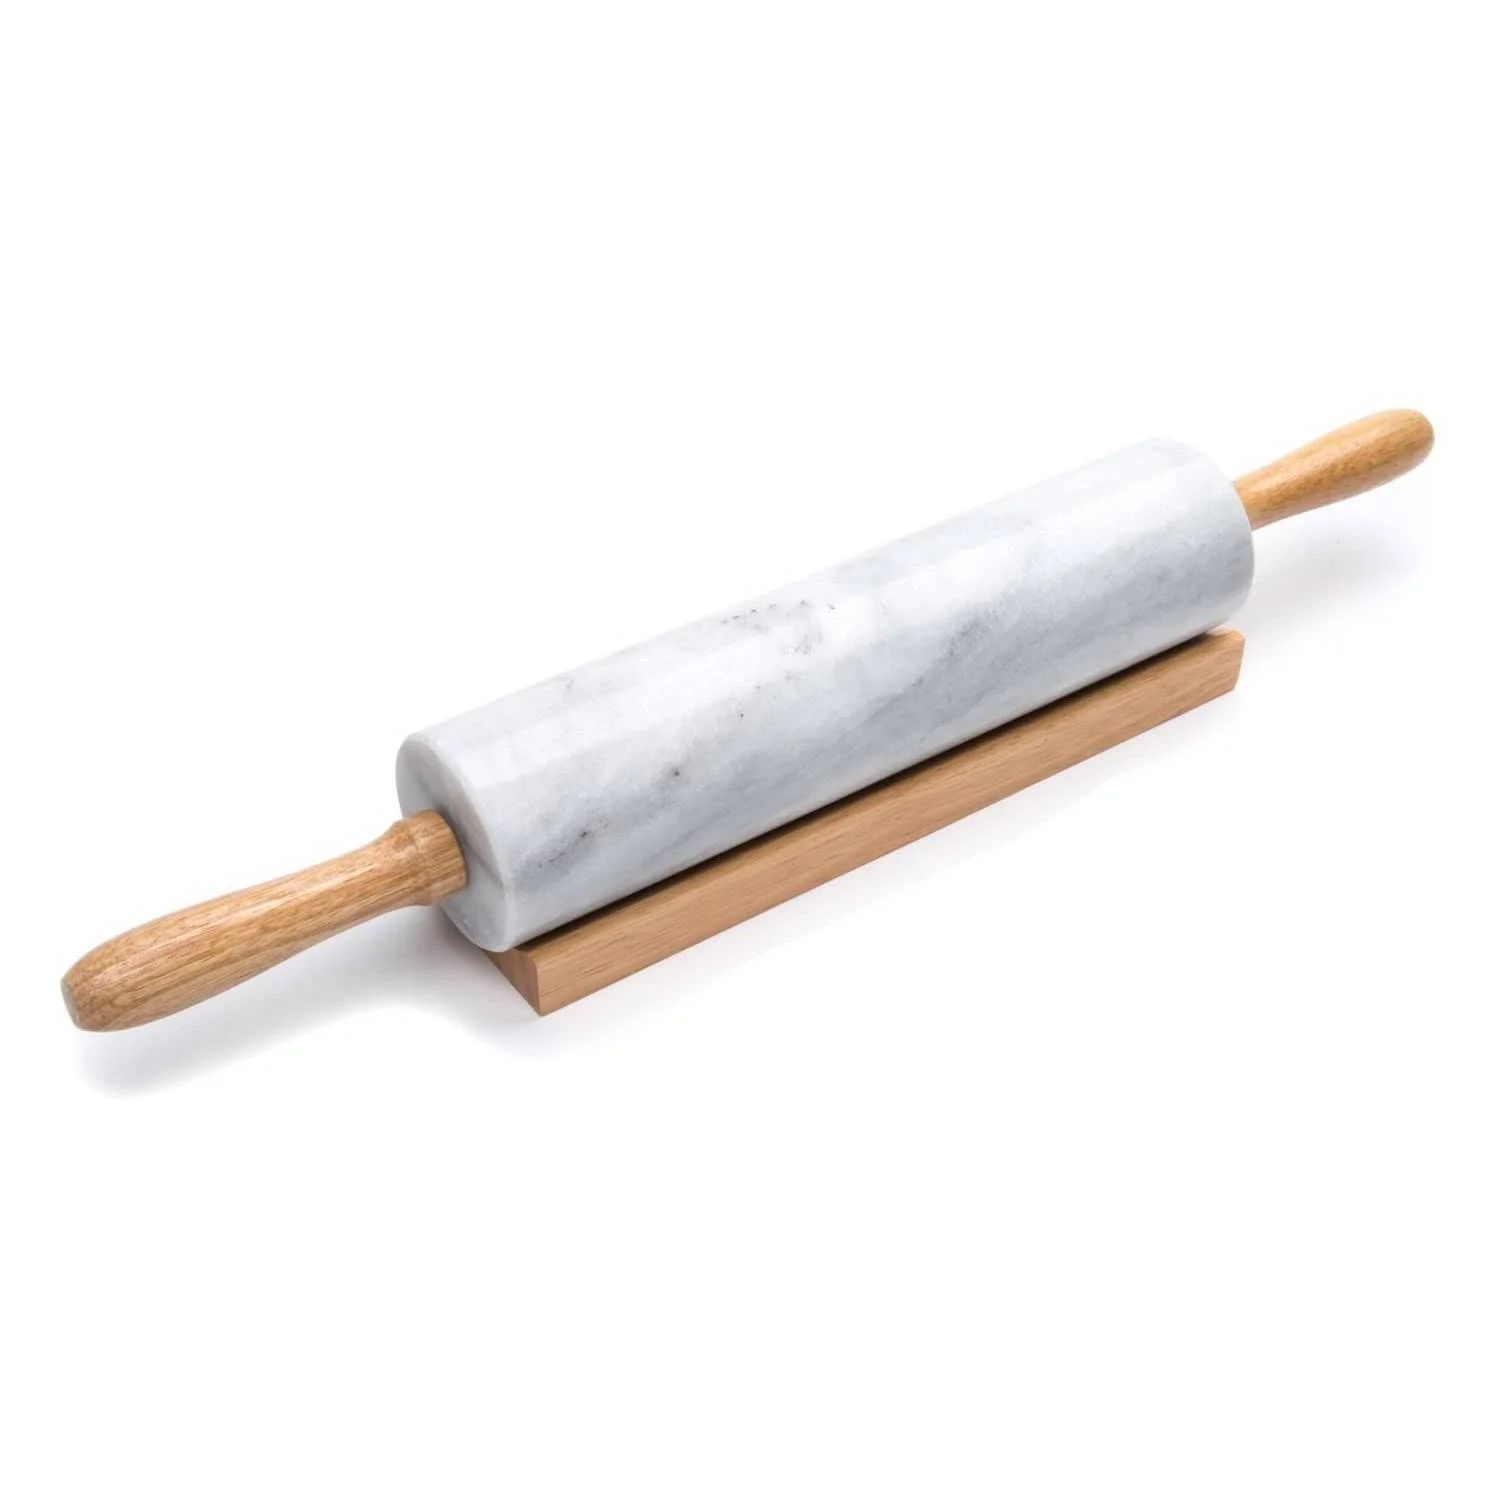 Fox Run Polished Marble Rolling Pin with Wooden Cradle, 10-Inch Barrel, White | Walmart (US)